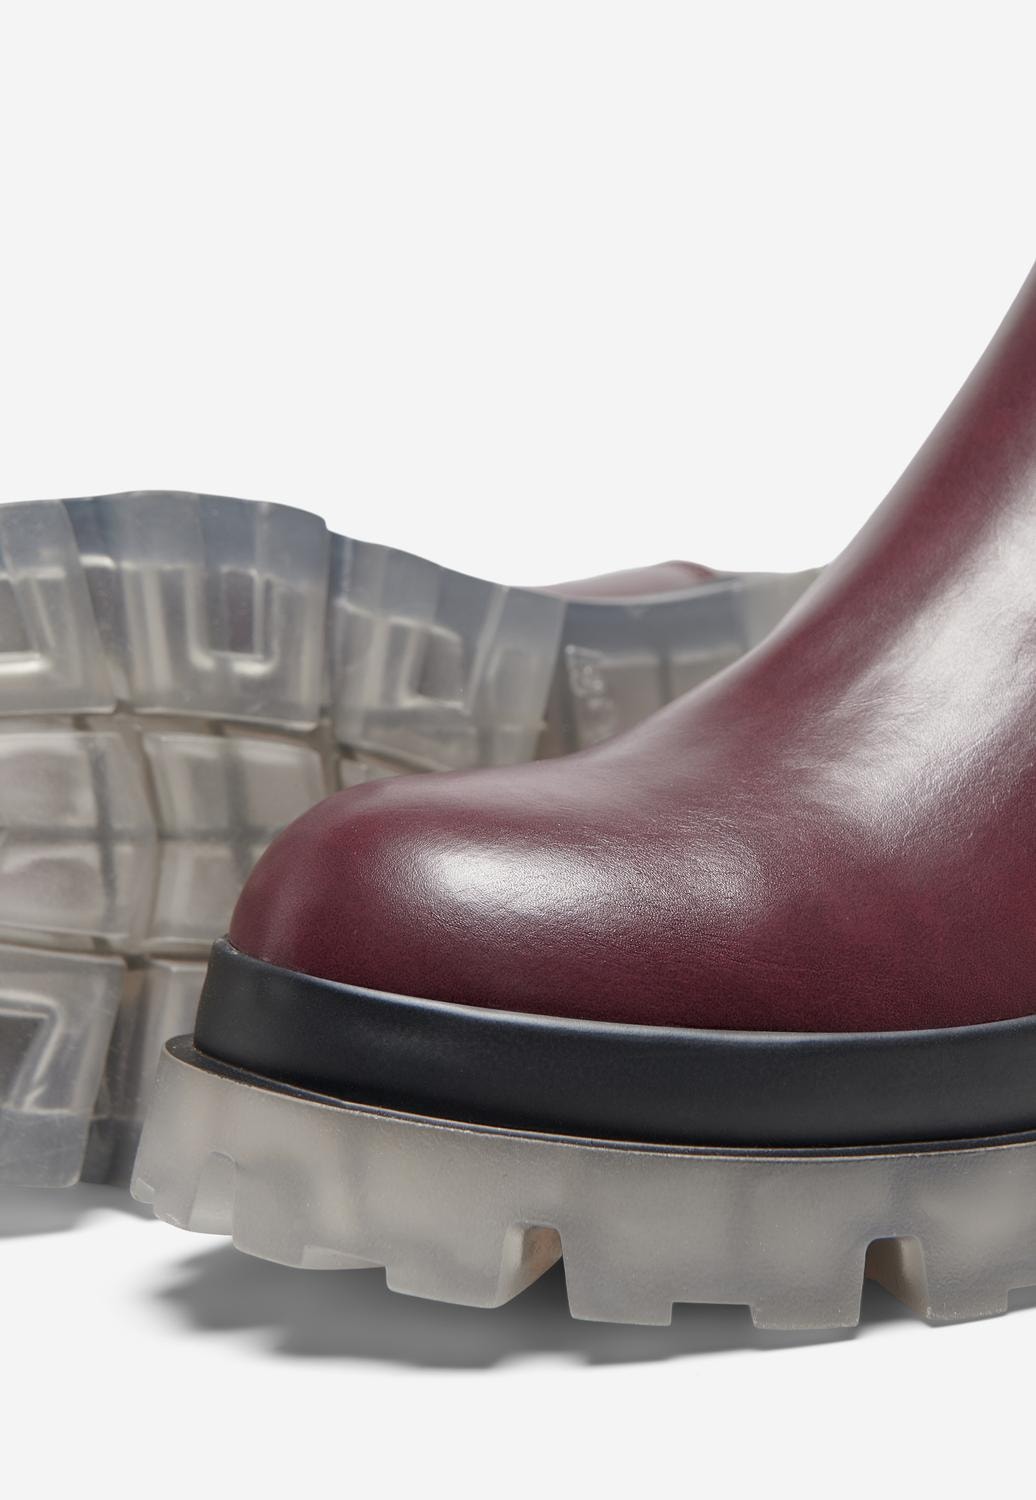 ONLY Chunky boots -Burgundy - 15272038